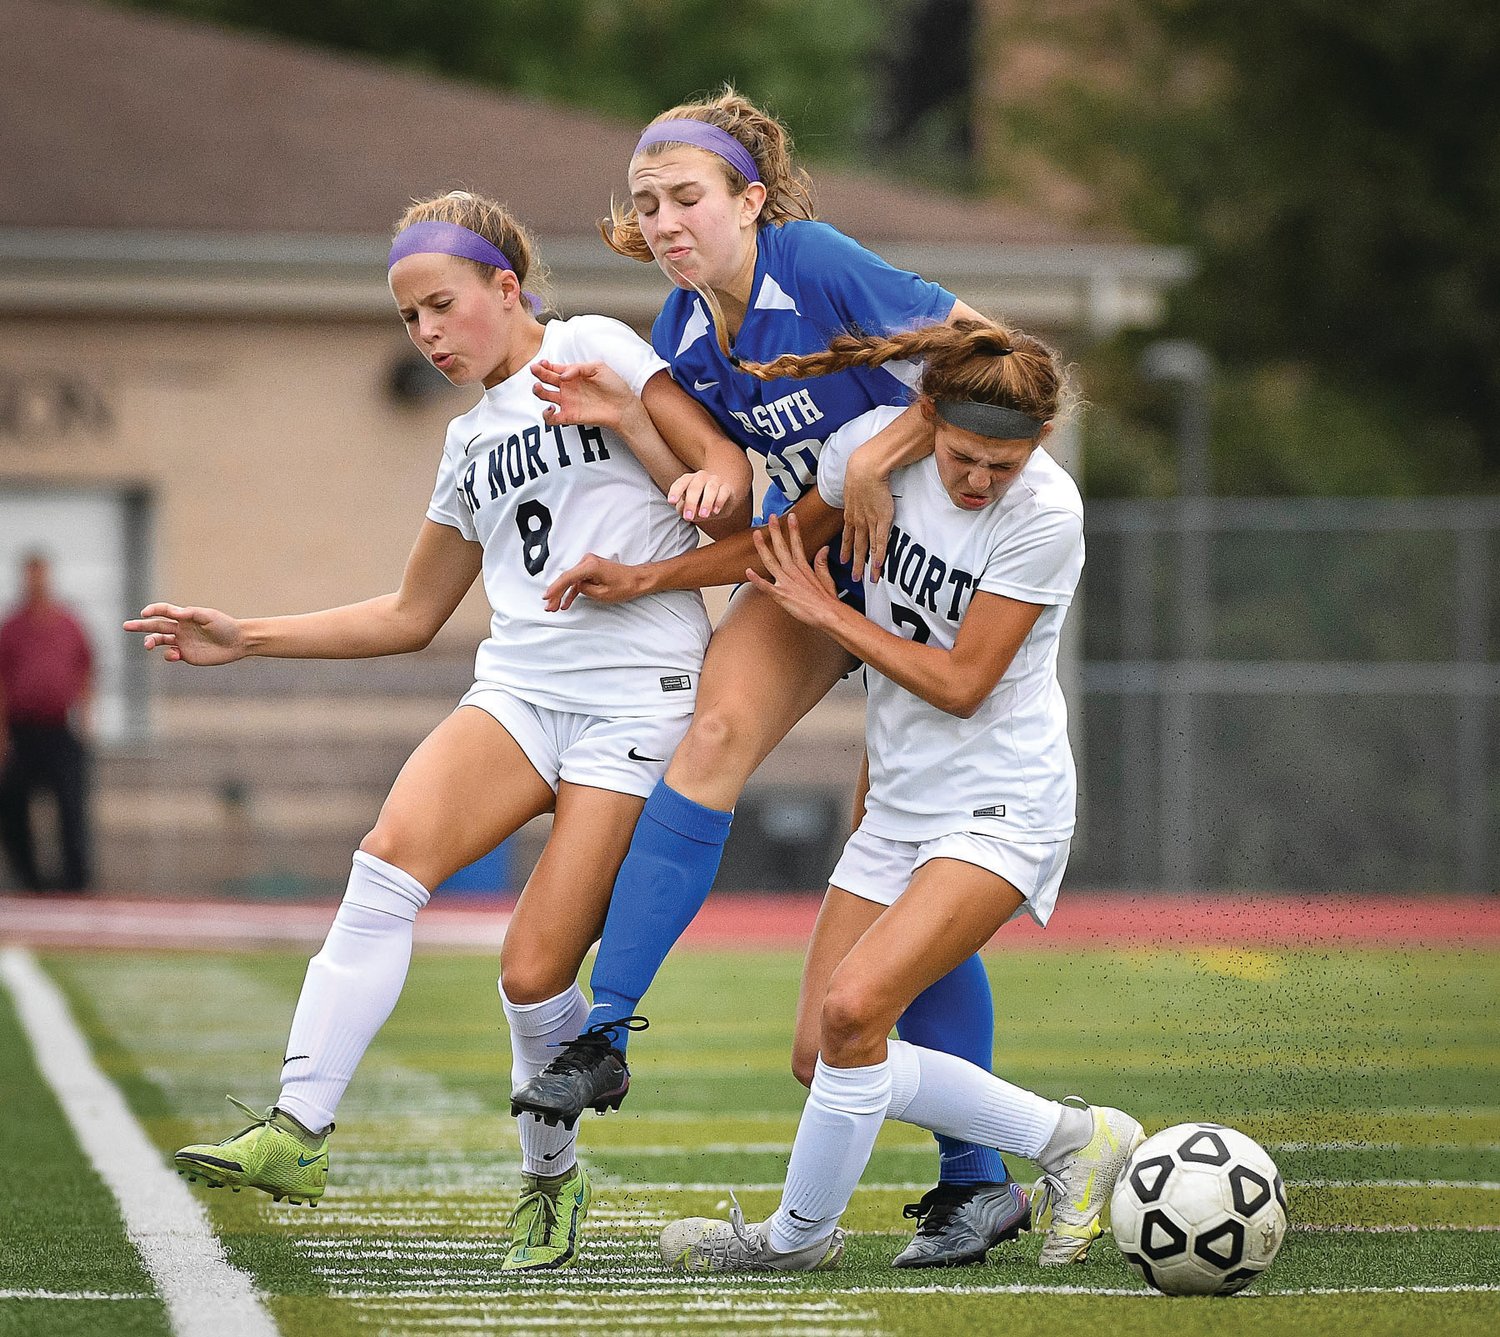 CB South’s Allison Sauers splits the defense of CR North’s Jayne Bogle and Lexi Fischer.